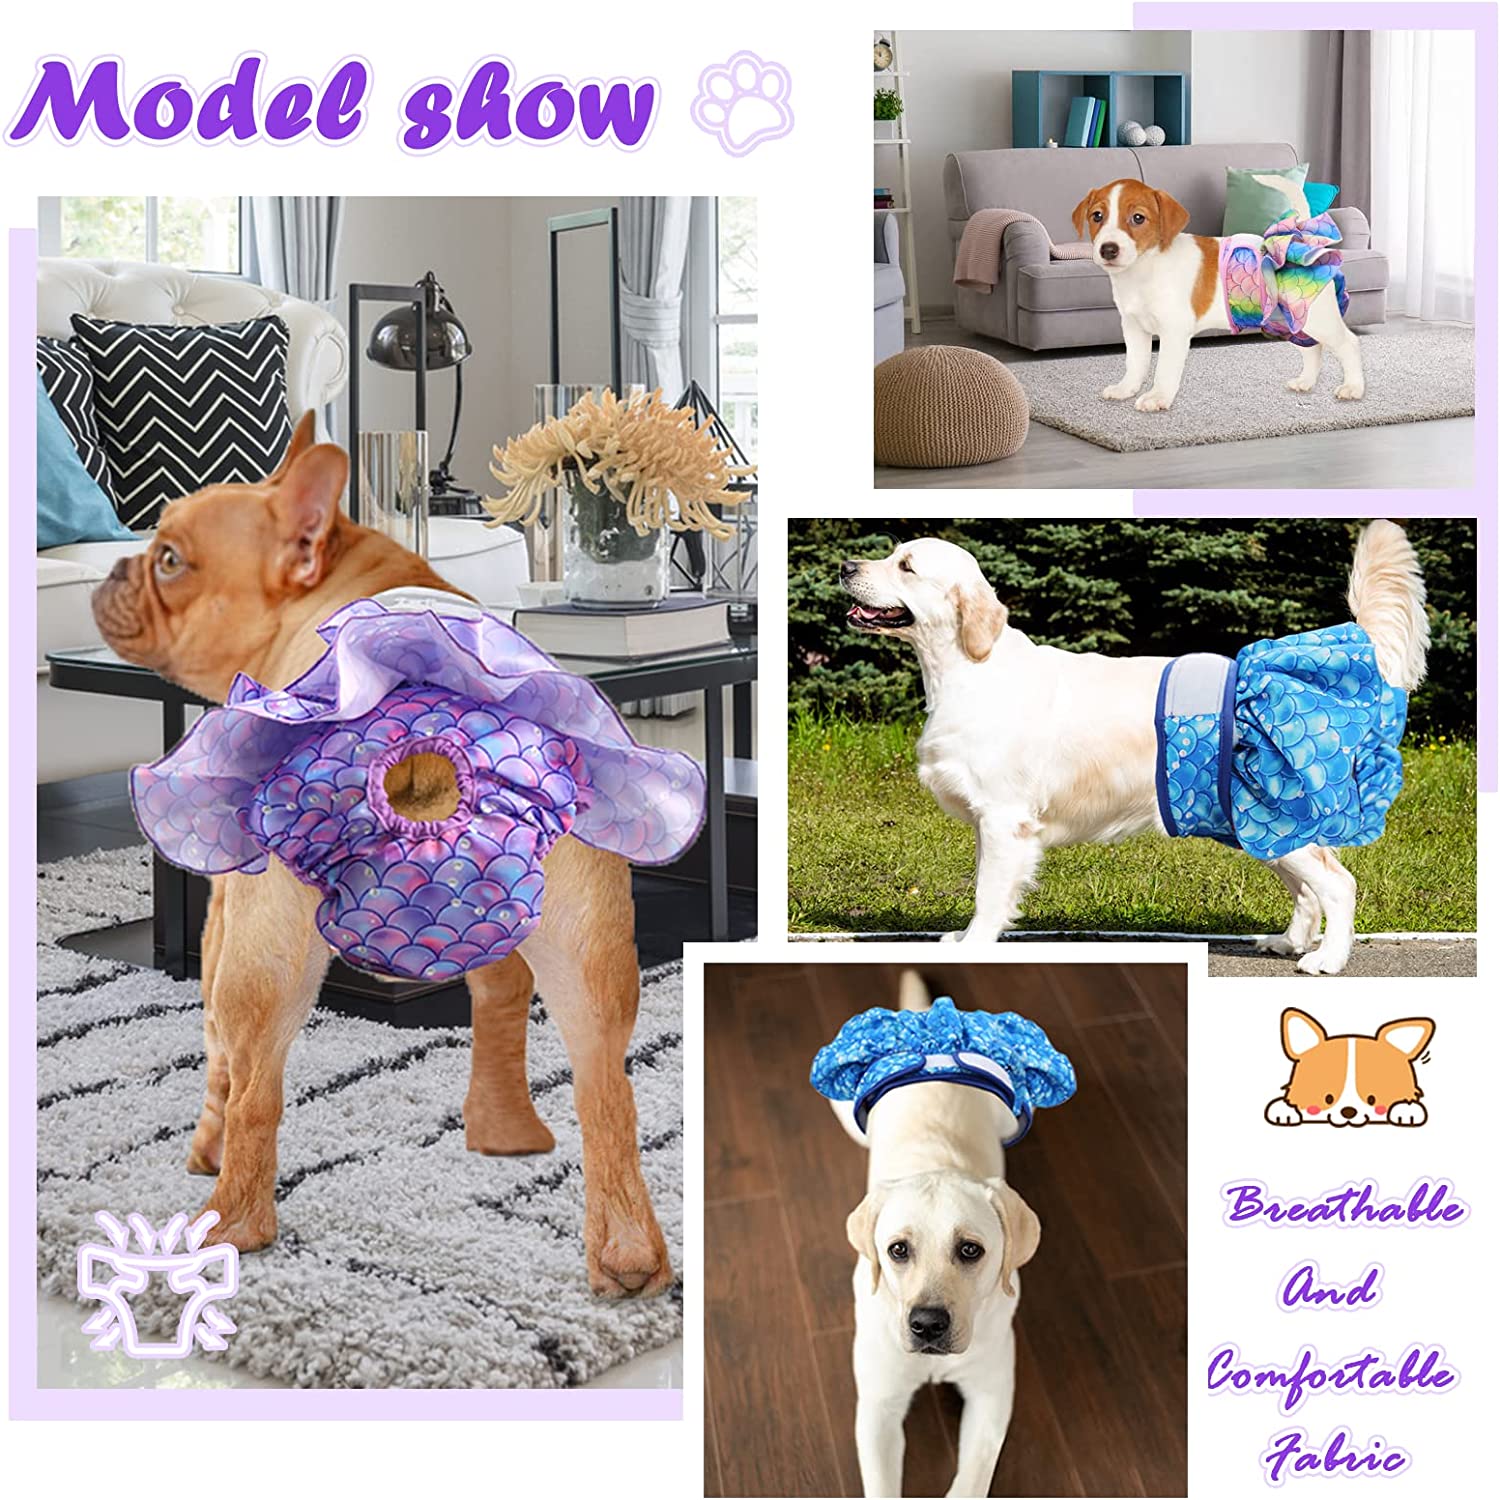 KUTKUT Female Dog Diapers, No Leak Washable Female Dog Diapers, Highly Absorbent Diapers for Dogs Female in Heat, Incontinence, Excitable Urination or Period Reusable Dog Skirt Diapers (Multi